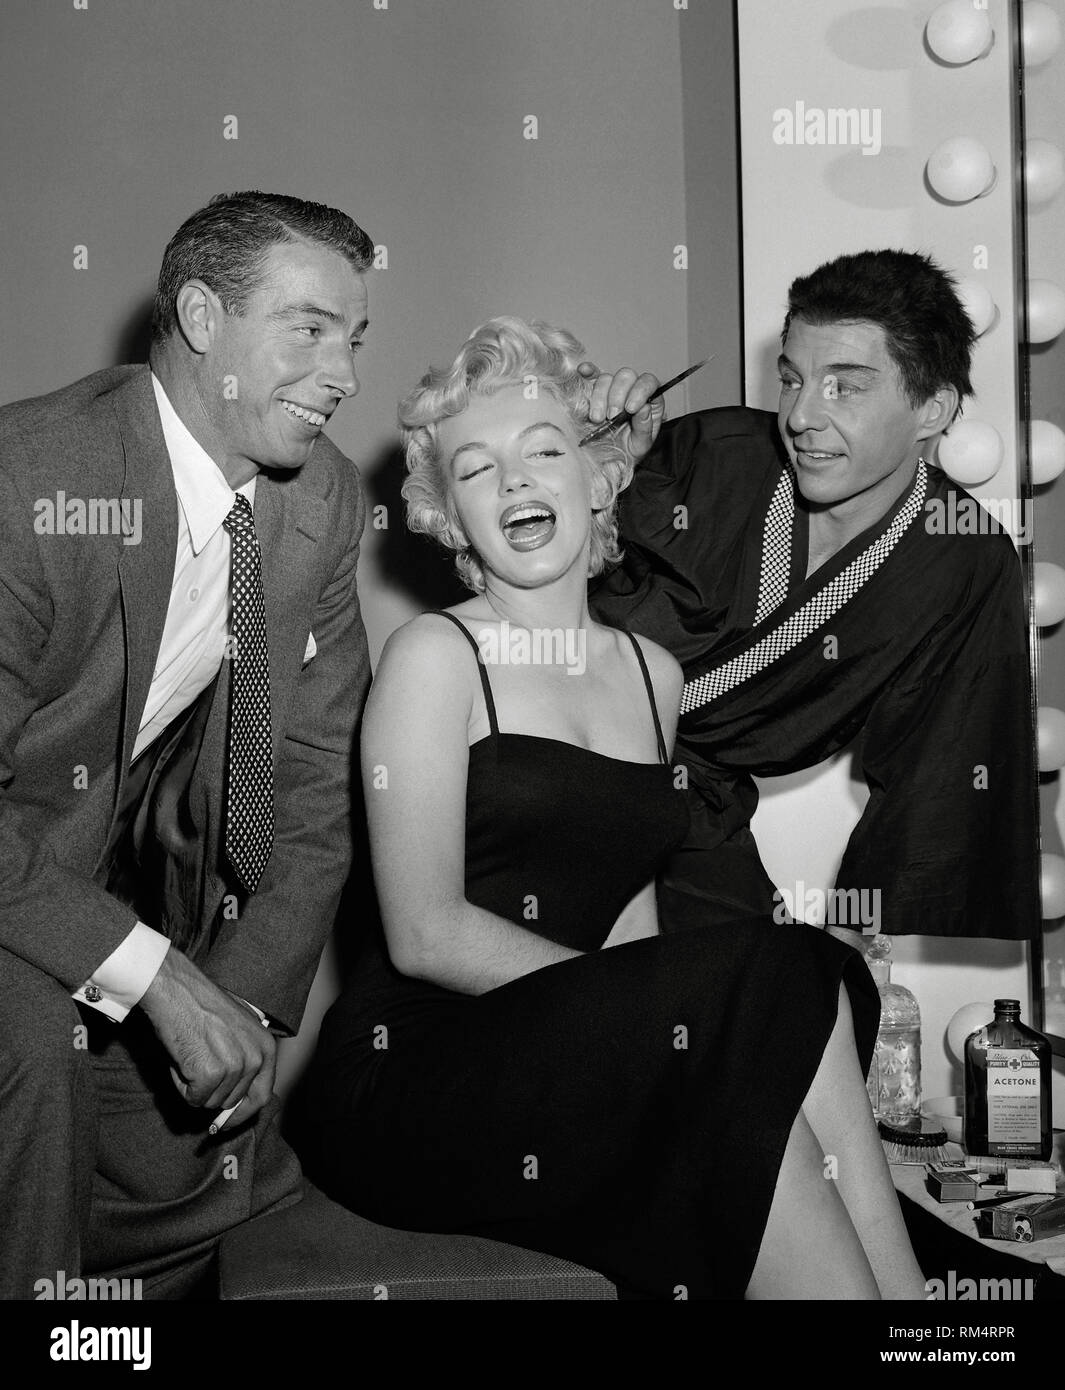 Icons in Palm Springs: Joe DiMaggio and Marilyn Monroe